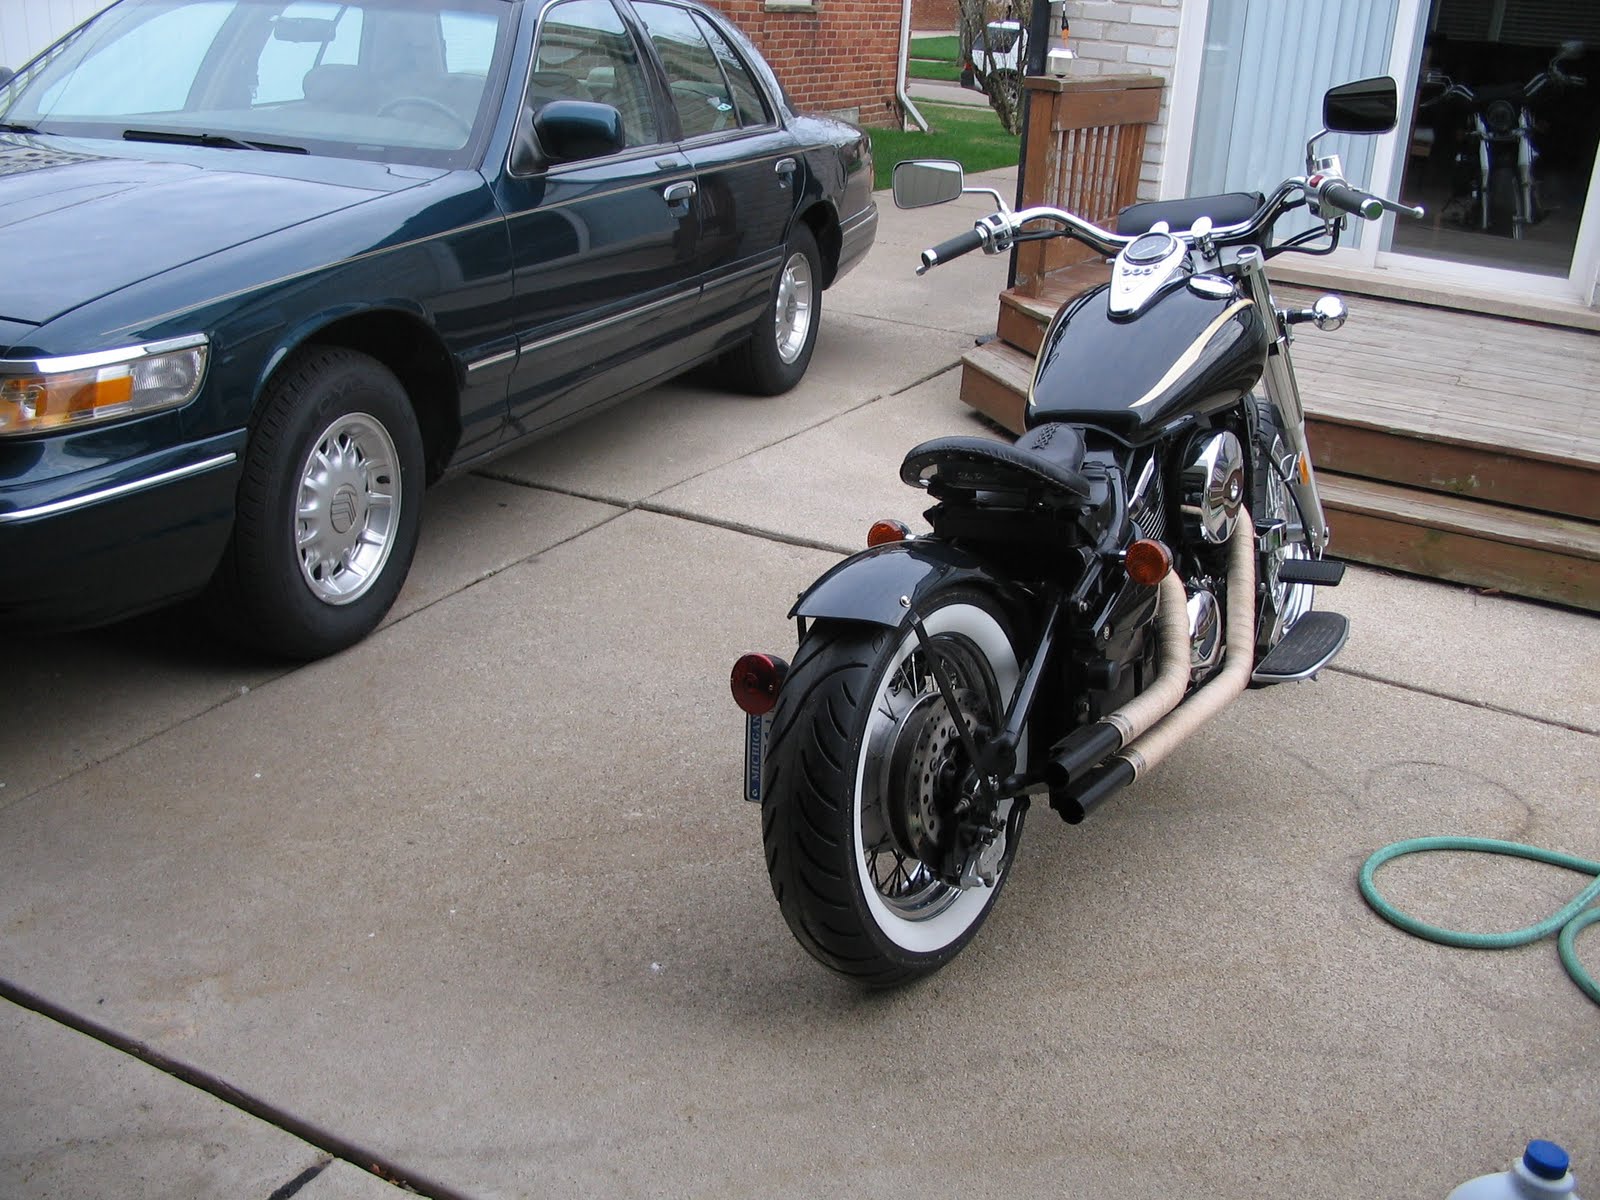 What are loudest pipes get for my Vulcan 800 project. | Kawasaki Motorcycle Forums